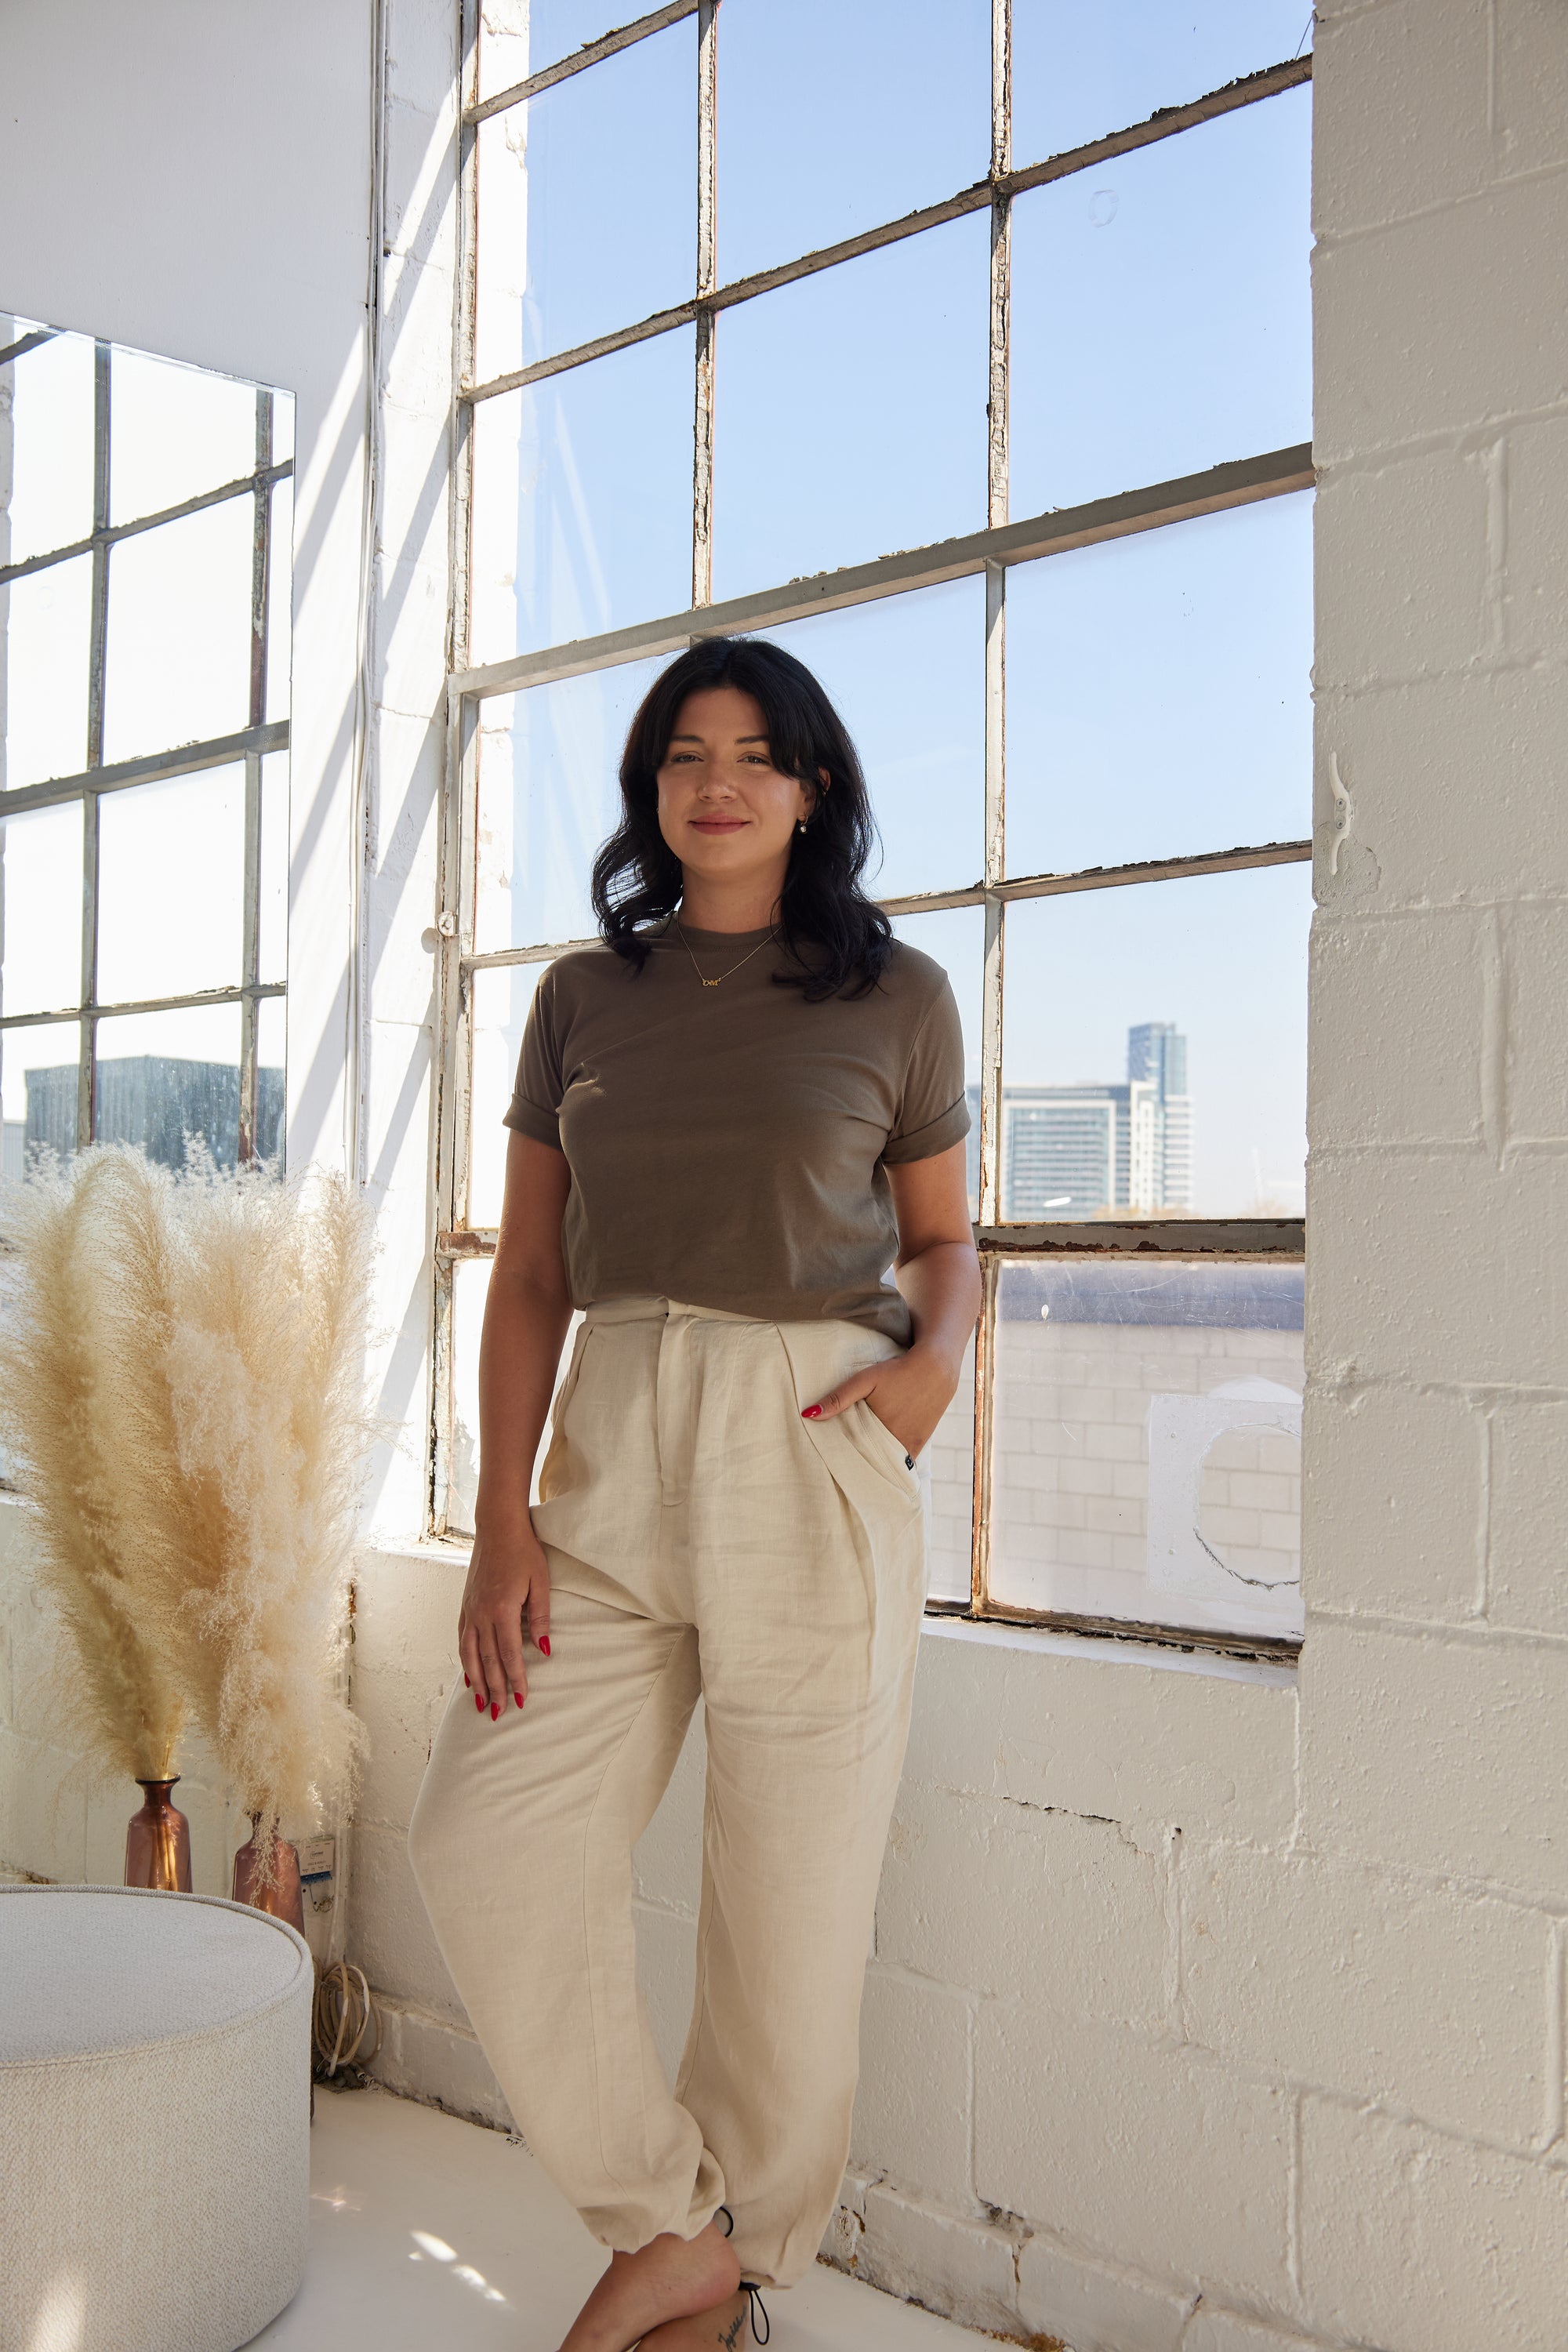 The Cotton Crew - Olive by Cassandra Elizabeth is an ethically made, minimalist wardrobe essential, and is the epitome of quiet luxury.